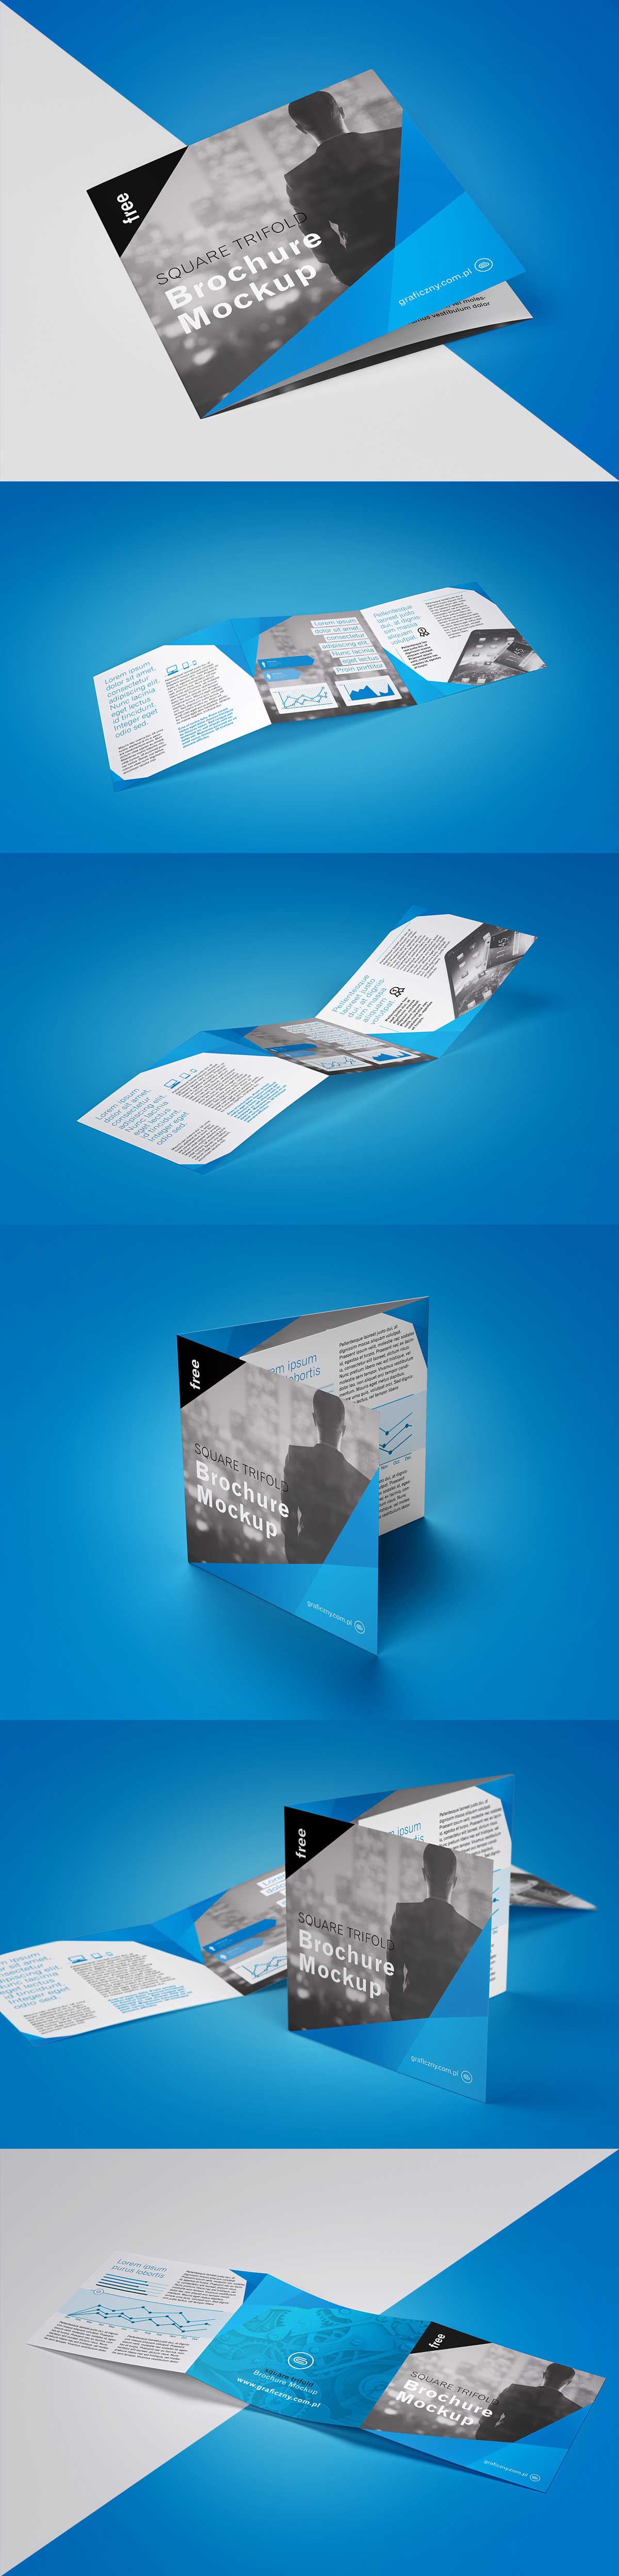 Free-Trifold-Square-Brochure-PSD